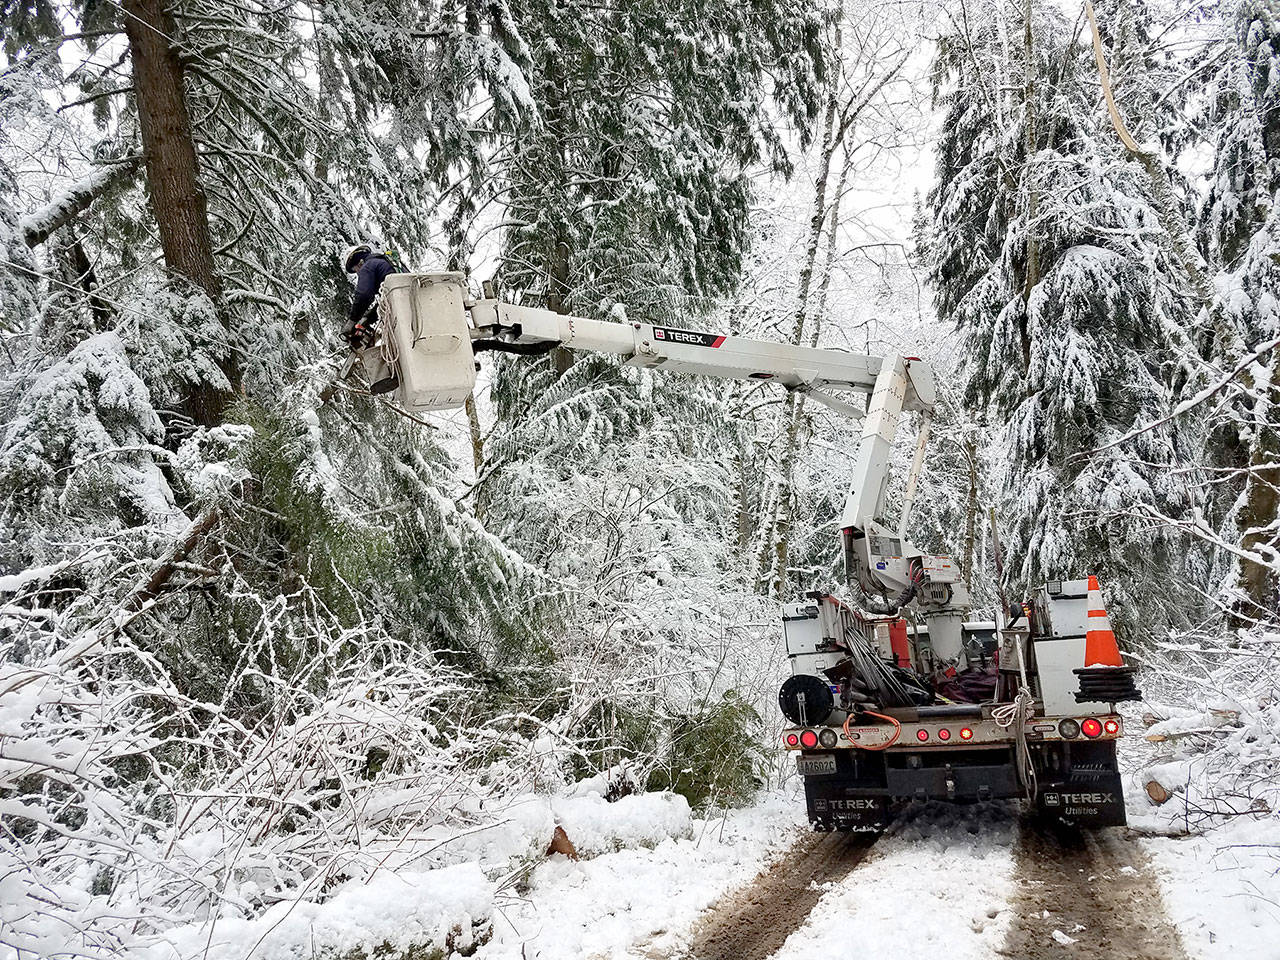 Jefferson County Public Utility District crews work to clear power lines and restore power to residents around Coyle and the Toandos Peninsula on Wednesday. (Jefferson County PUD)